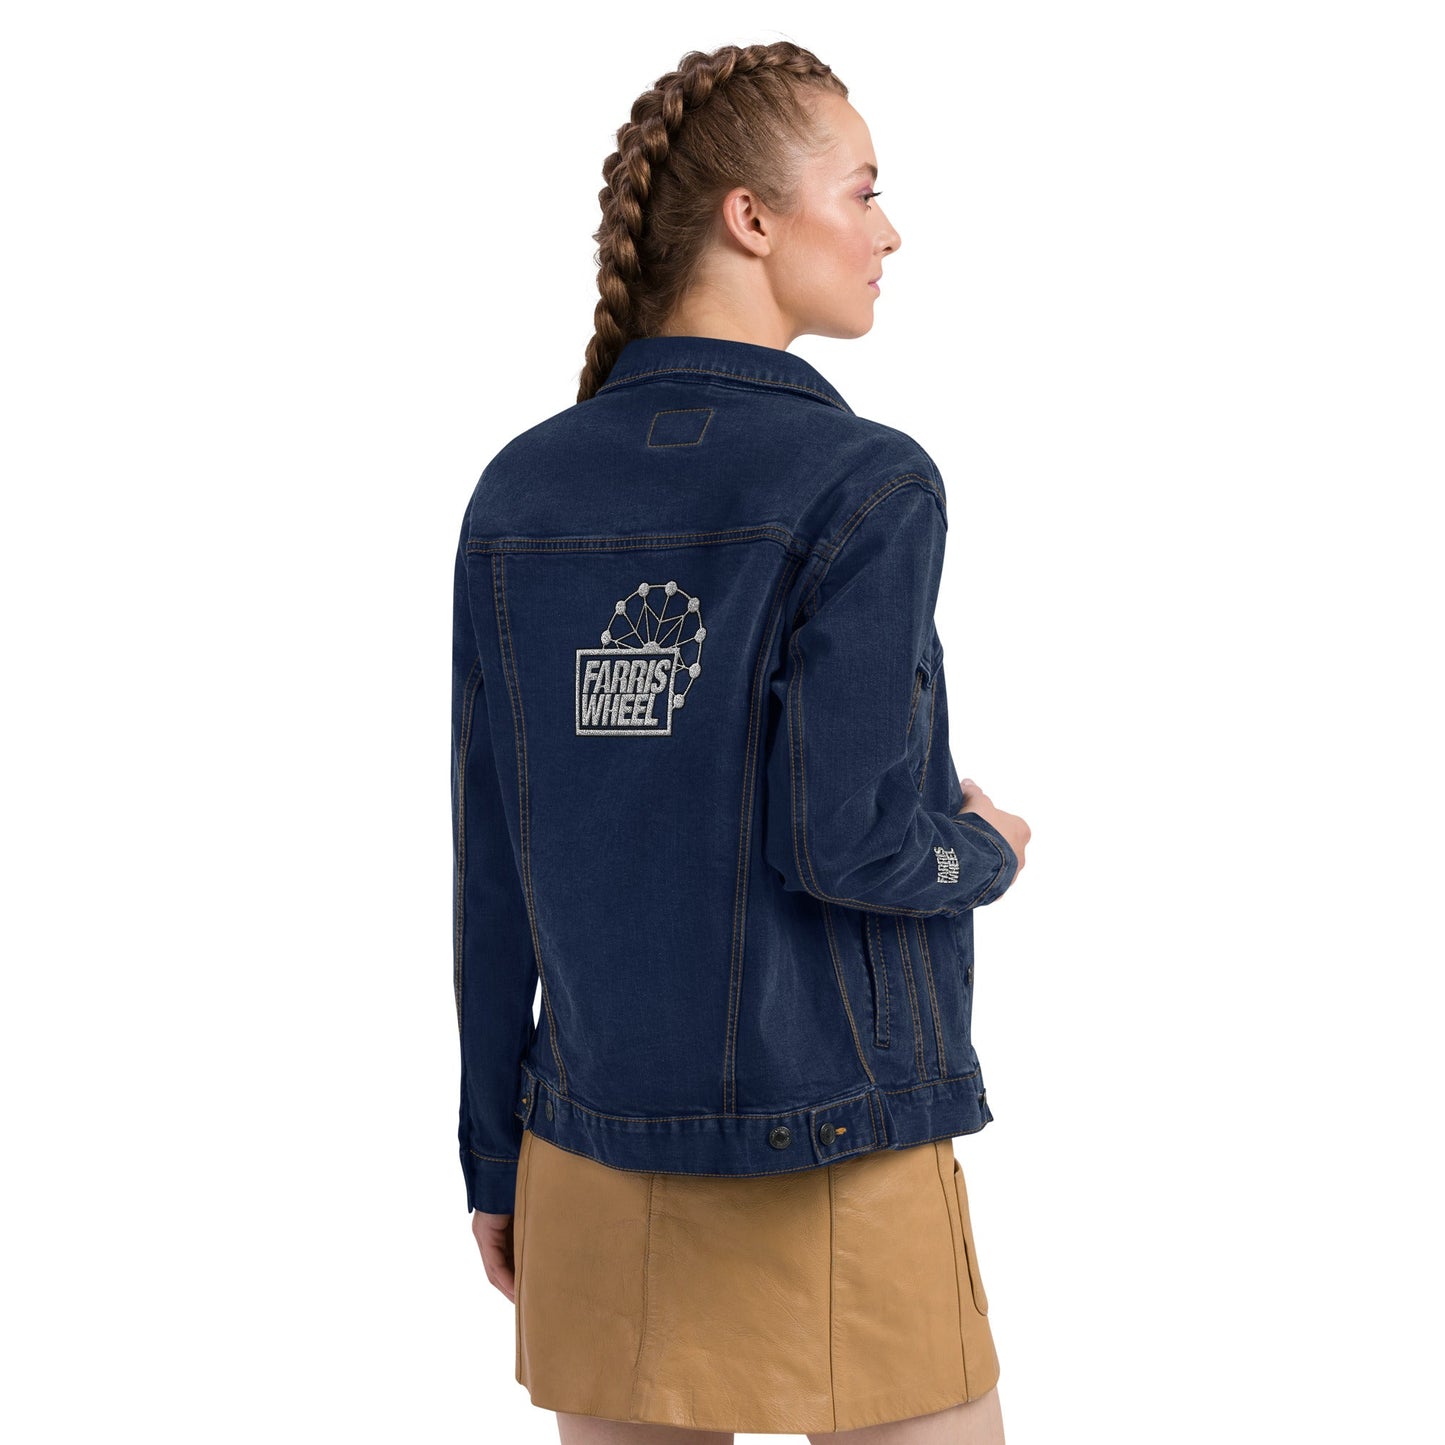 Farris Wheel Embroidered Unisex Denim Jacket - BeExtra! Apparel & More